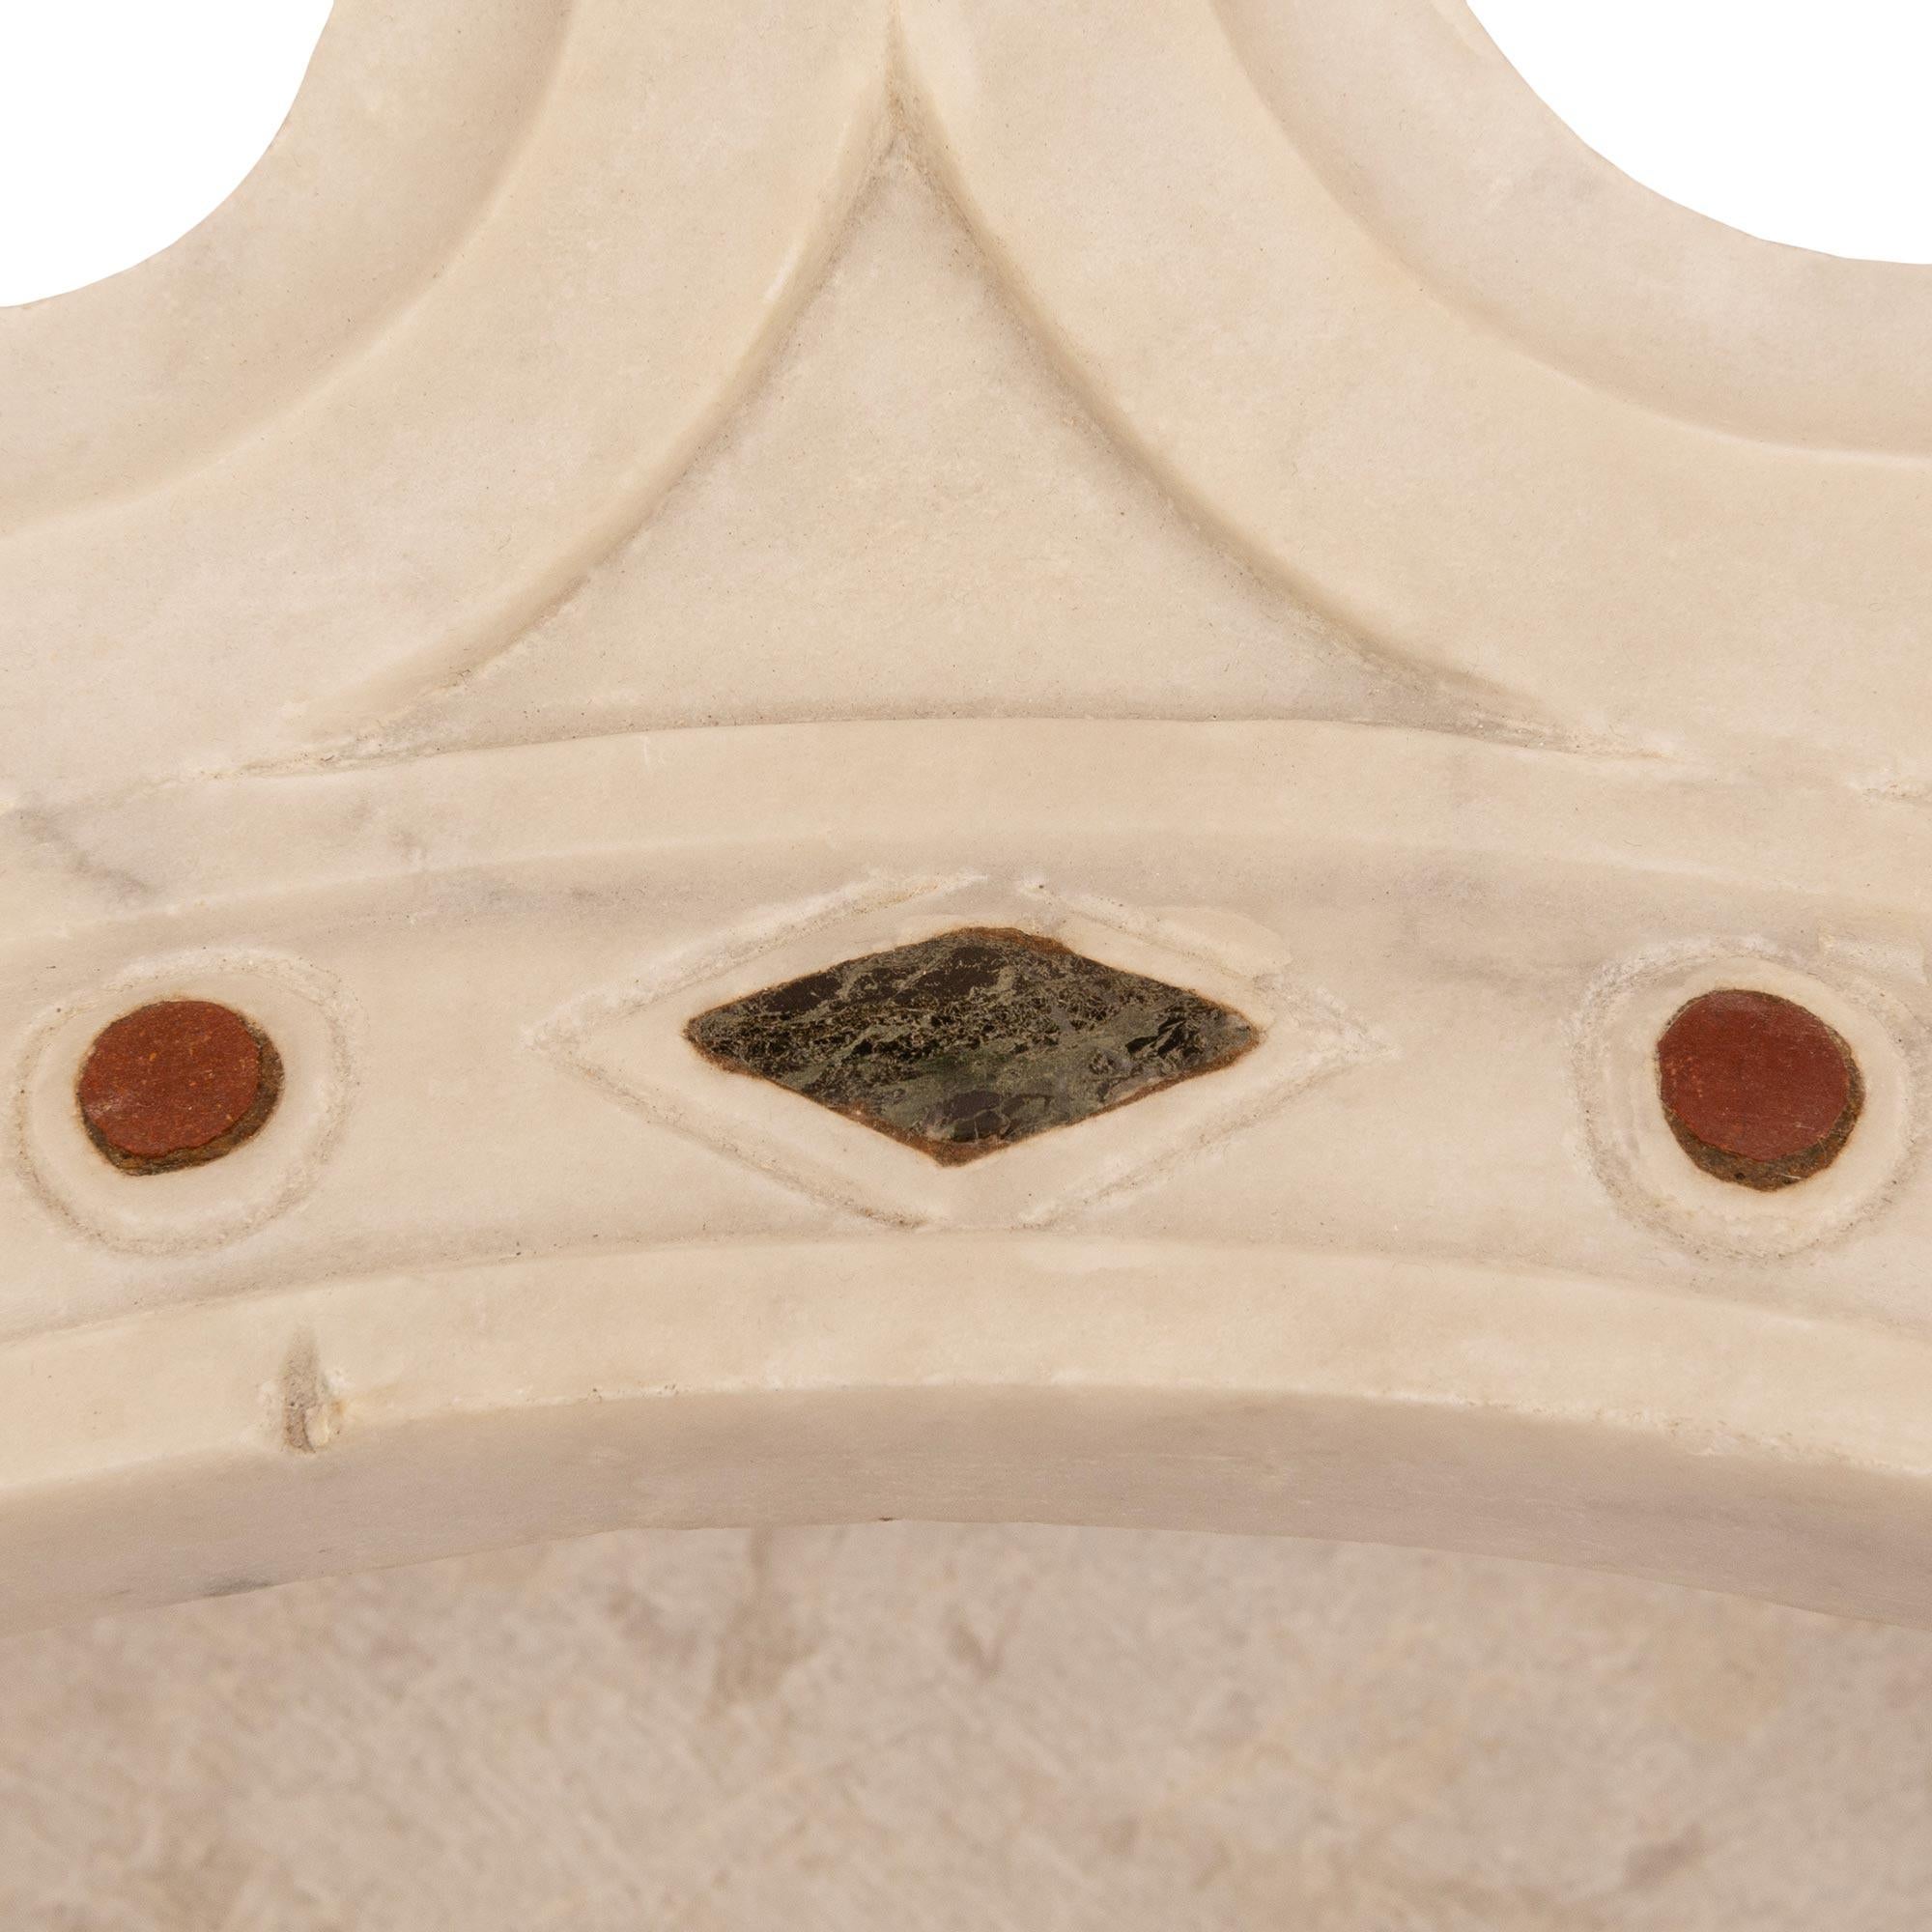 A beautiful and most decorative Italian 19th century architectural wall element of a crown. The white Carrara marble crown is jeweled with other marble inlays of Vert de Patricia, Sienna and Rosso Marbles. The peeks of the crown showcase a wonderful